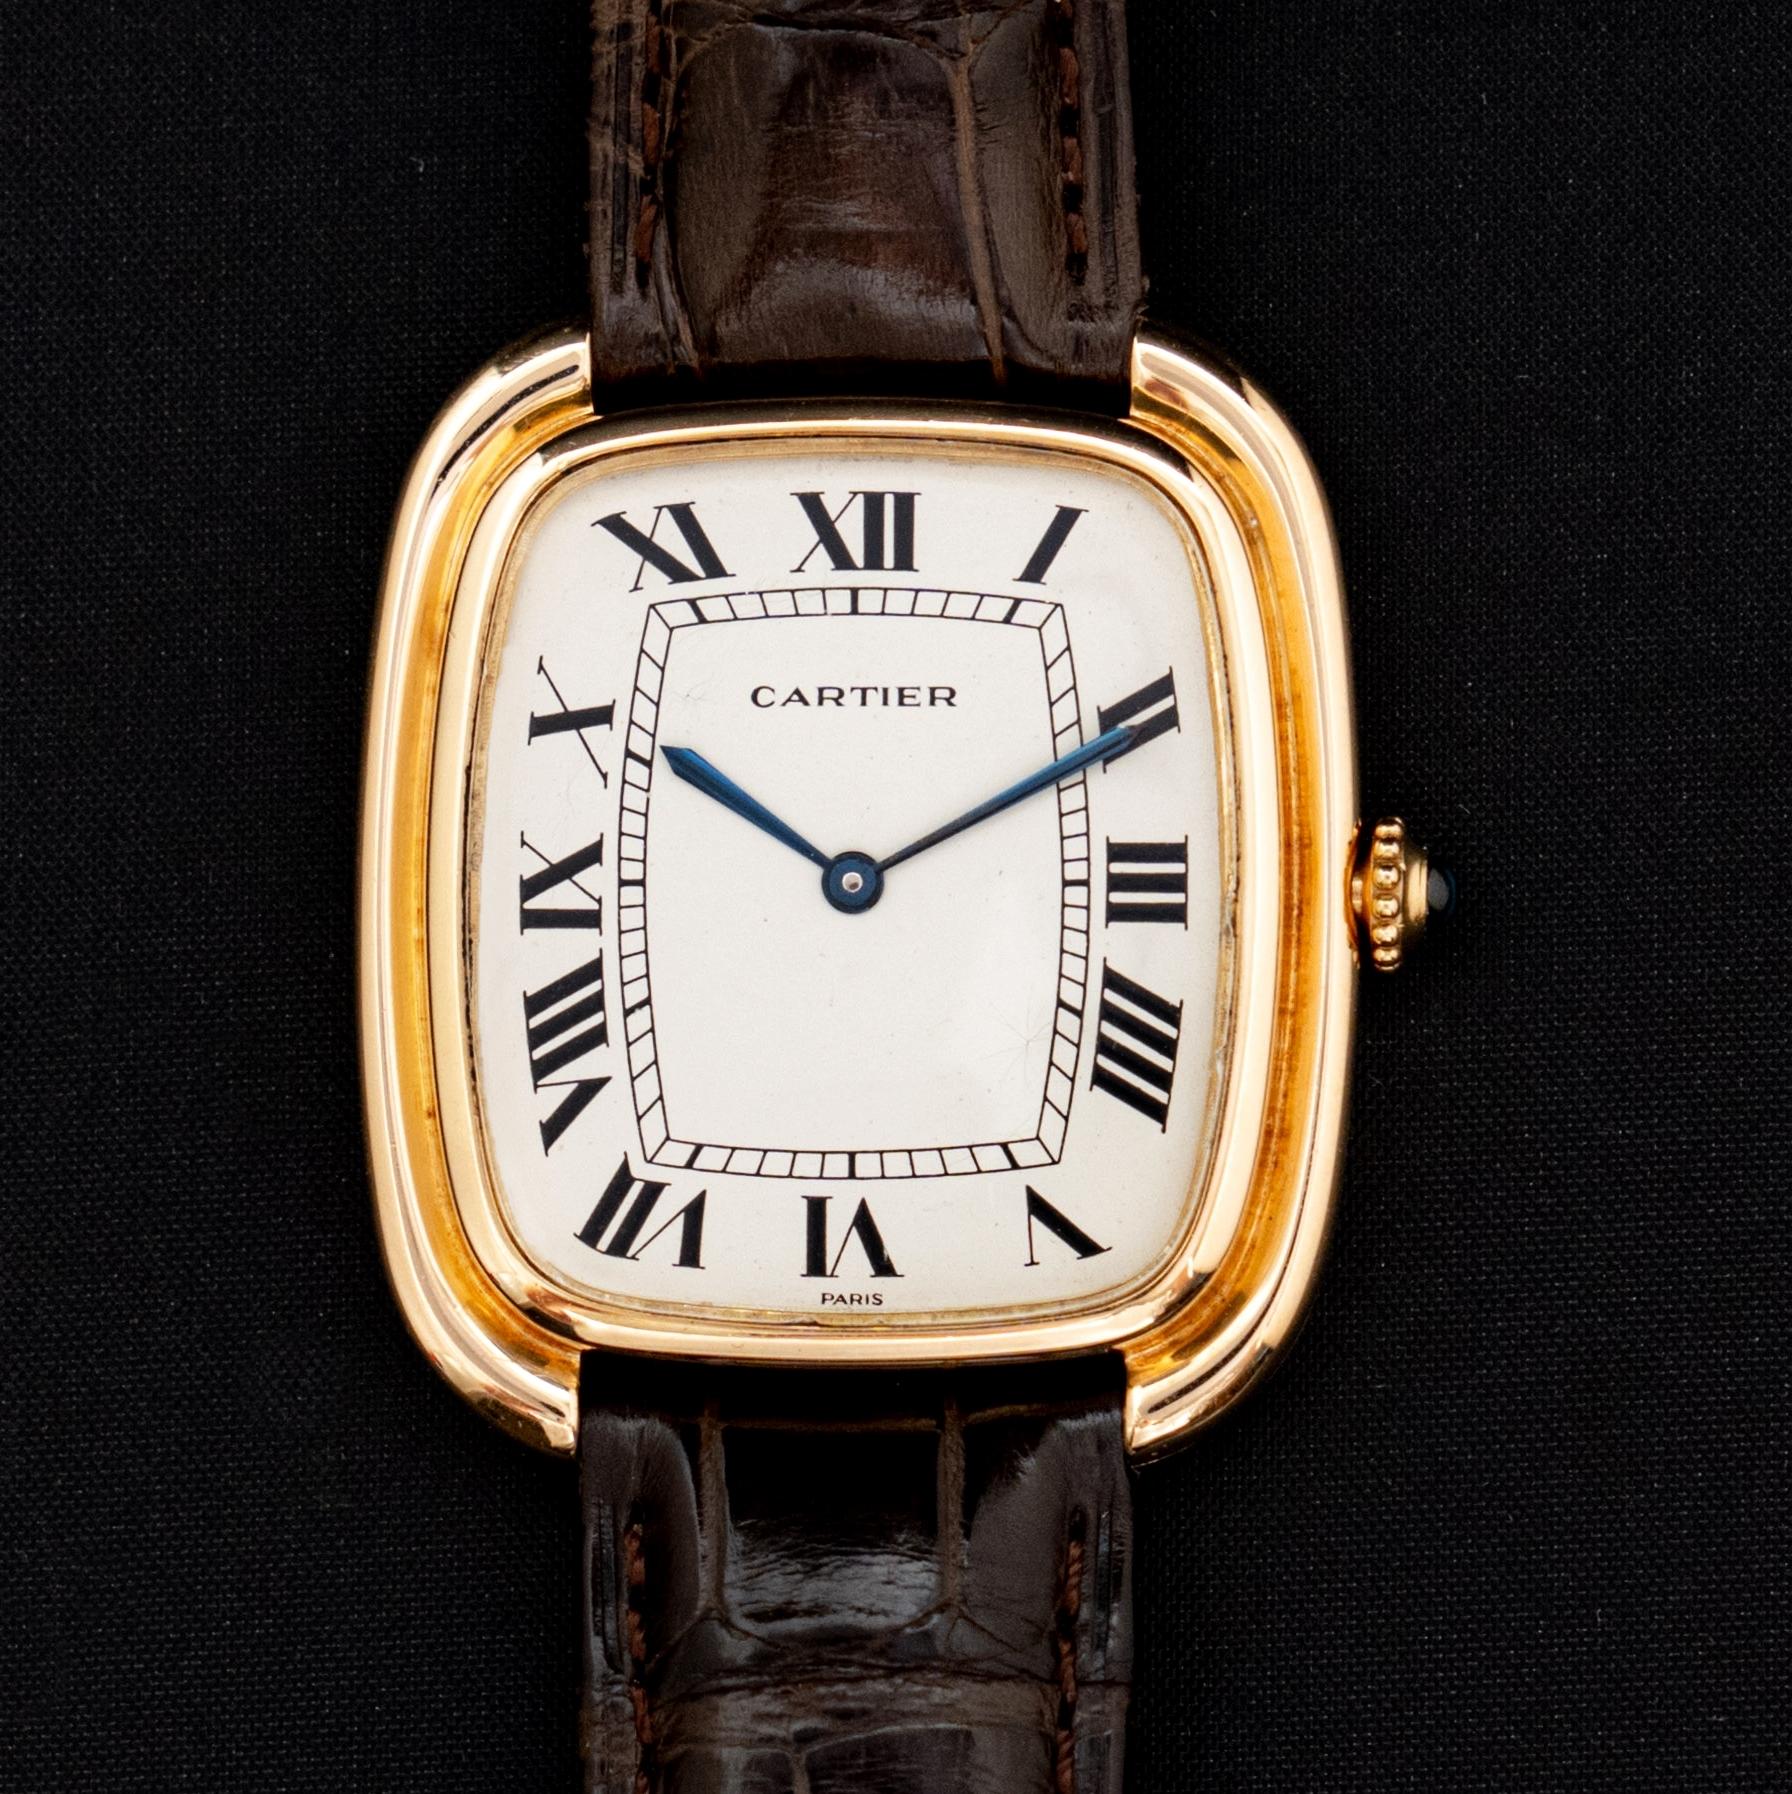 Brand: Cartier
Model: Gondole XL Jumbo
Year: 1970’s
Serial Number: 9705xxxxx
Reference: C03896

In 1972, Cartier introduced the ‘Louis Cartier Collection’ to commemorate its relocation of manufacturing operations from France to Switzerland. This